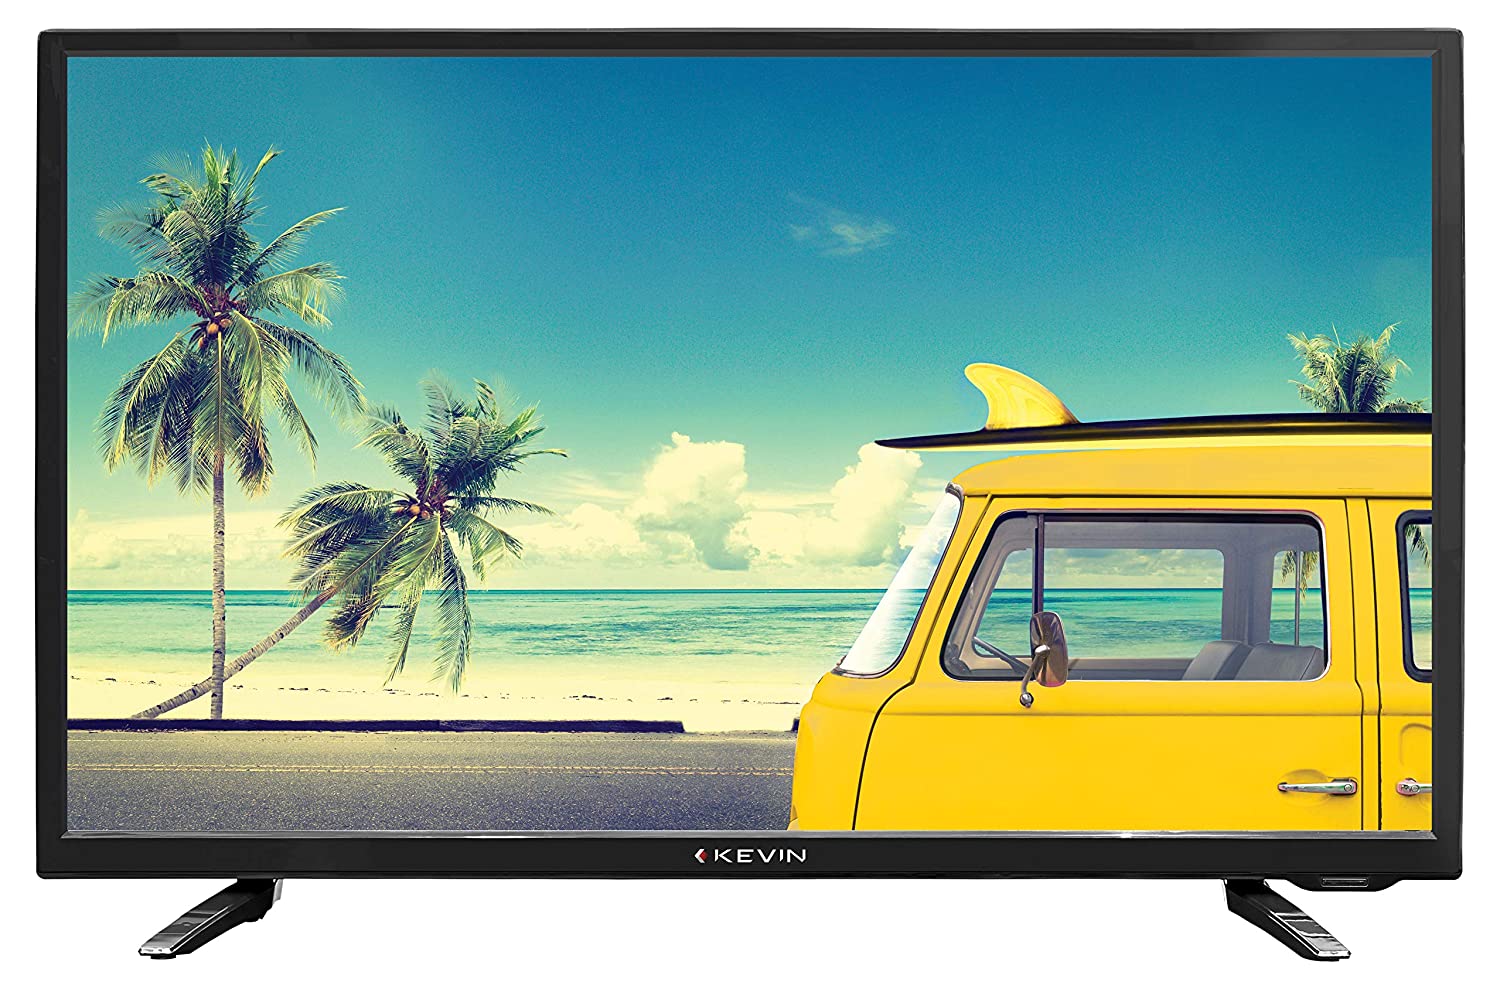 Kevin 32 Inches HD Ready LED TV @ Rs.6999 (SBI Credit Card) Rs.7777 For Others